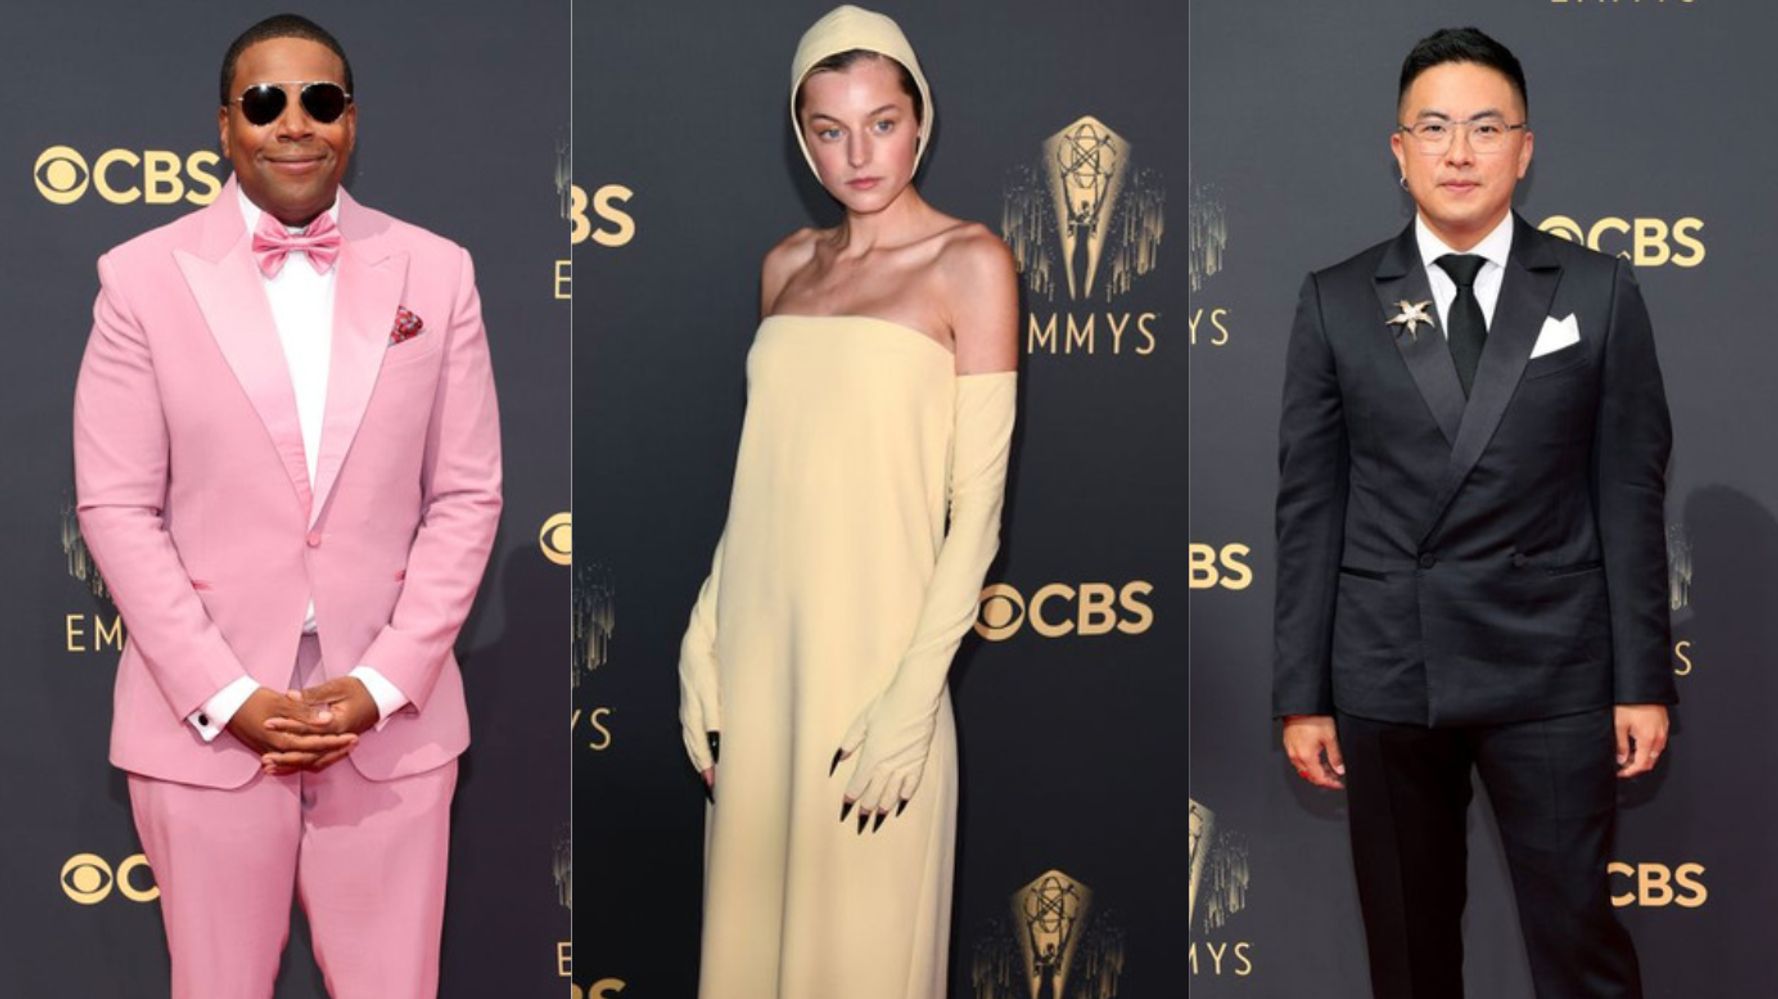 Emmy Awards 2021: See What The Best-Dressed Celebrities Wore On The Red Carpet